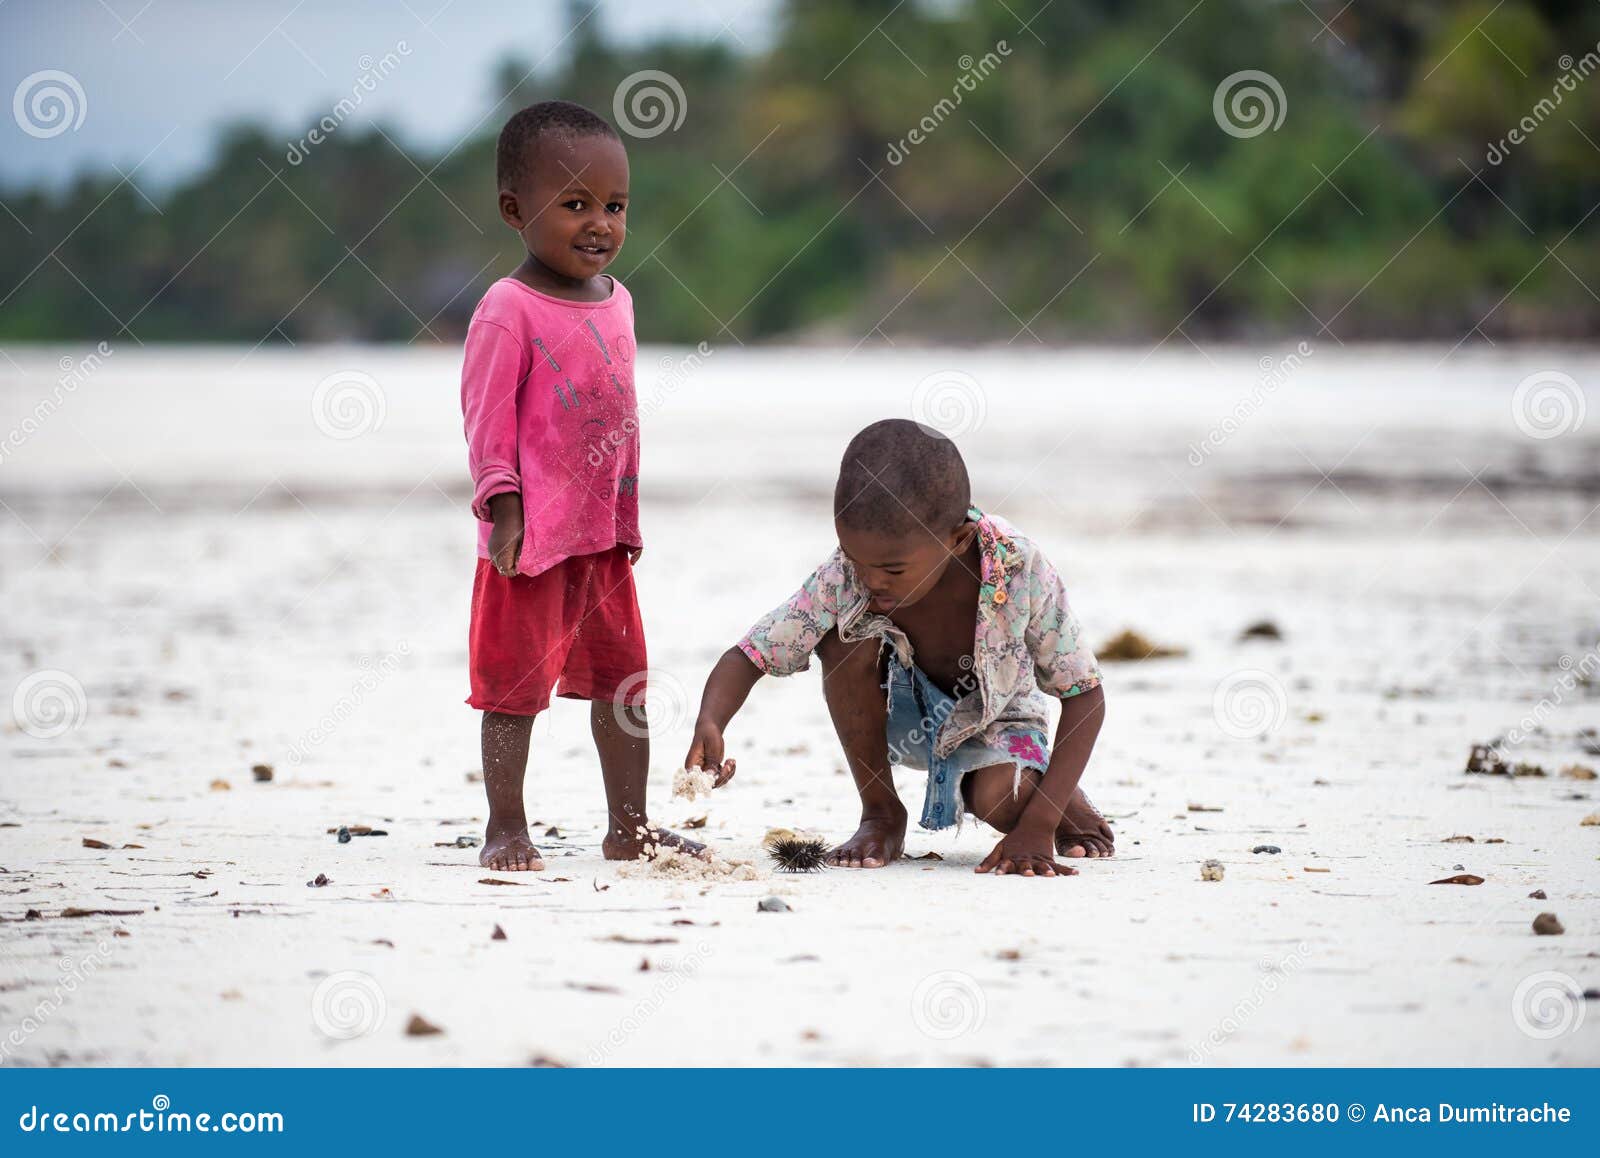 African children playing editorial image. Image of - 74283680